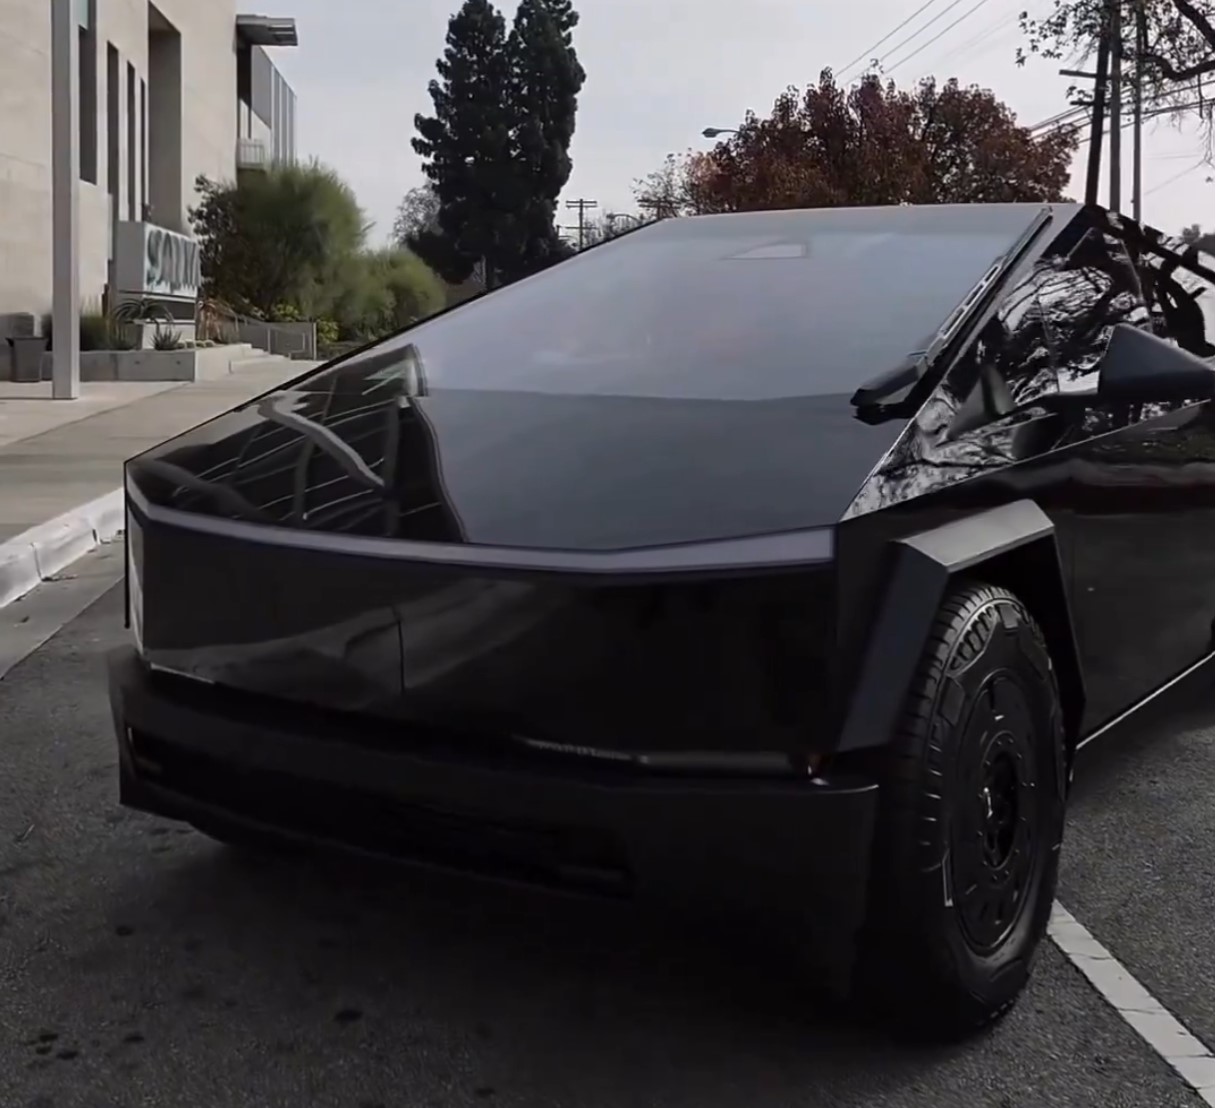 Stunning View Of Tesla Cybertruck In Complete Gloss Black Wrap: Shines ...